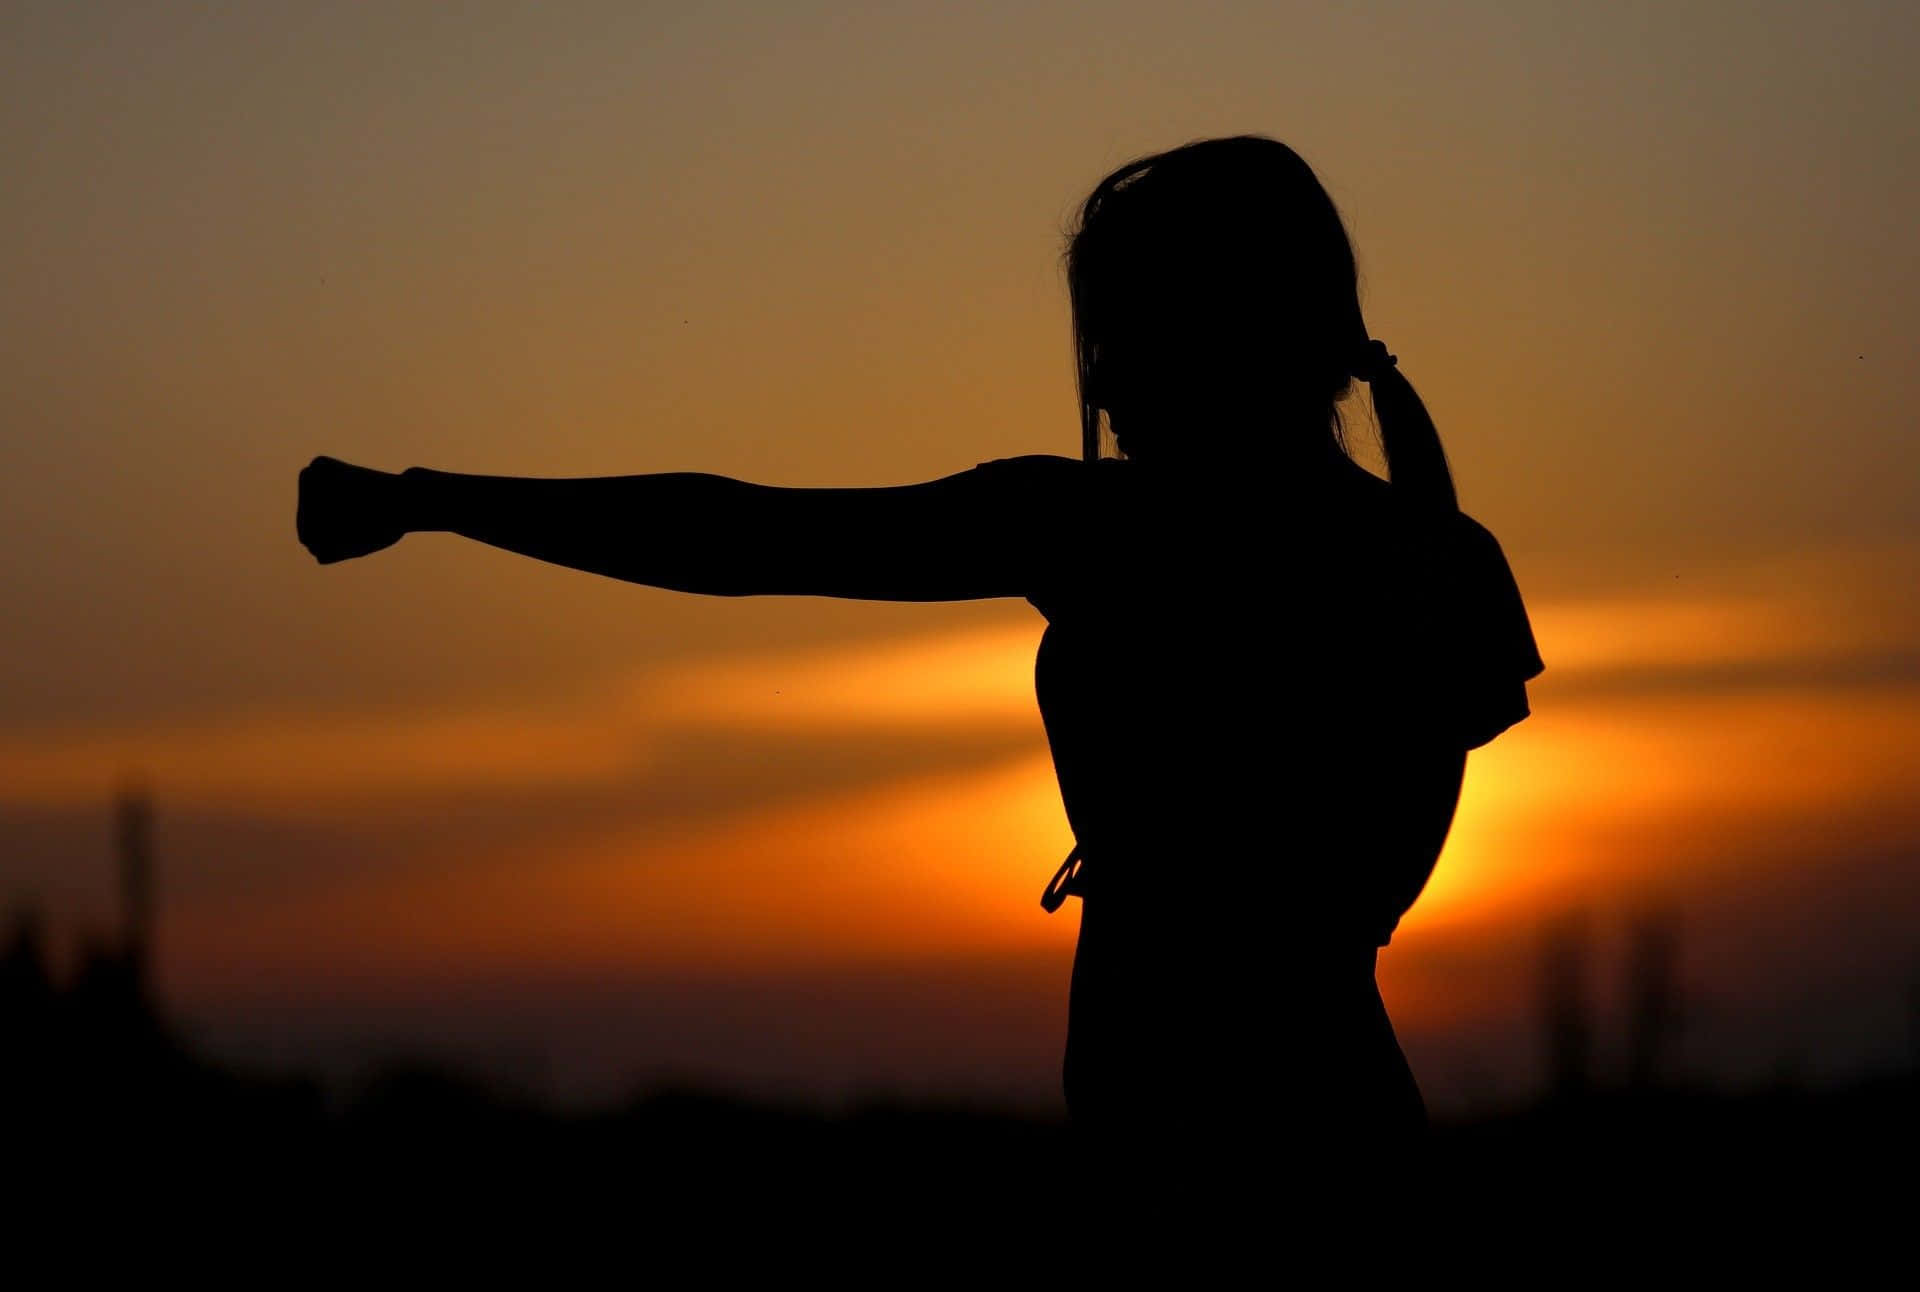 Silhouette Of A Woman With Her Fist Raised In The Air